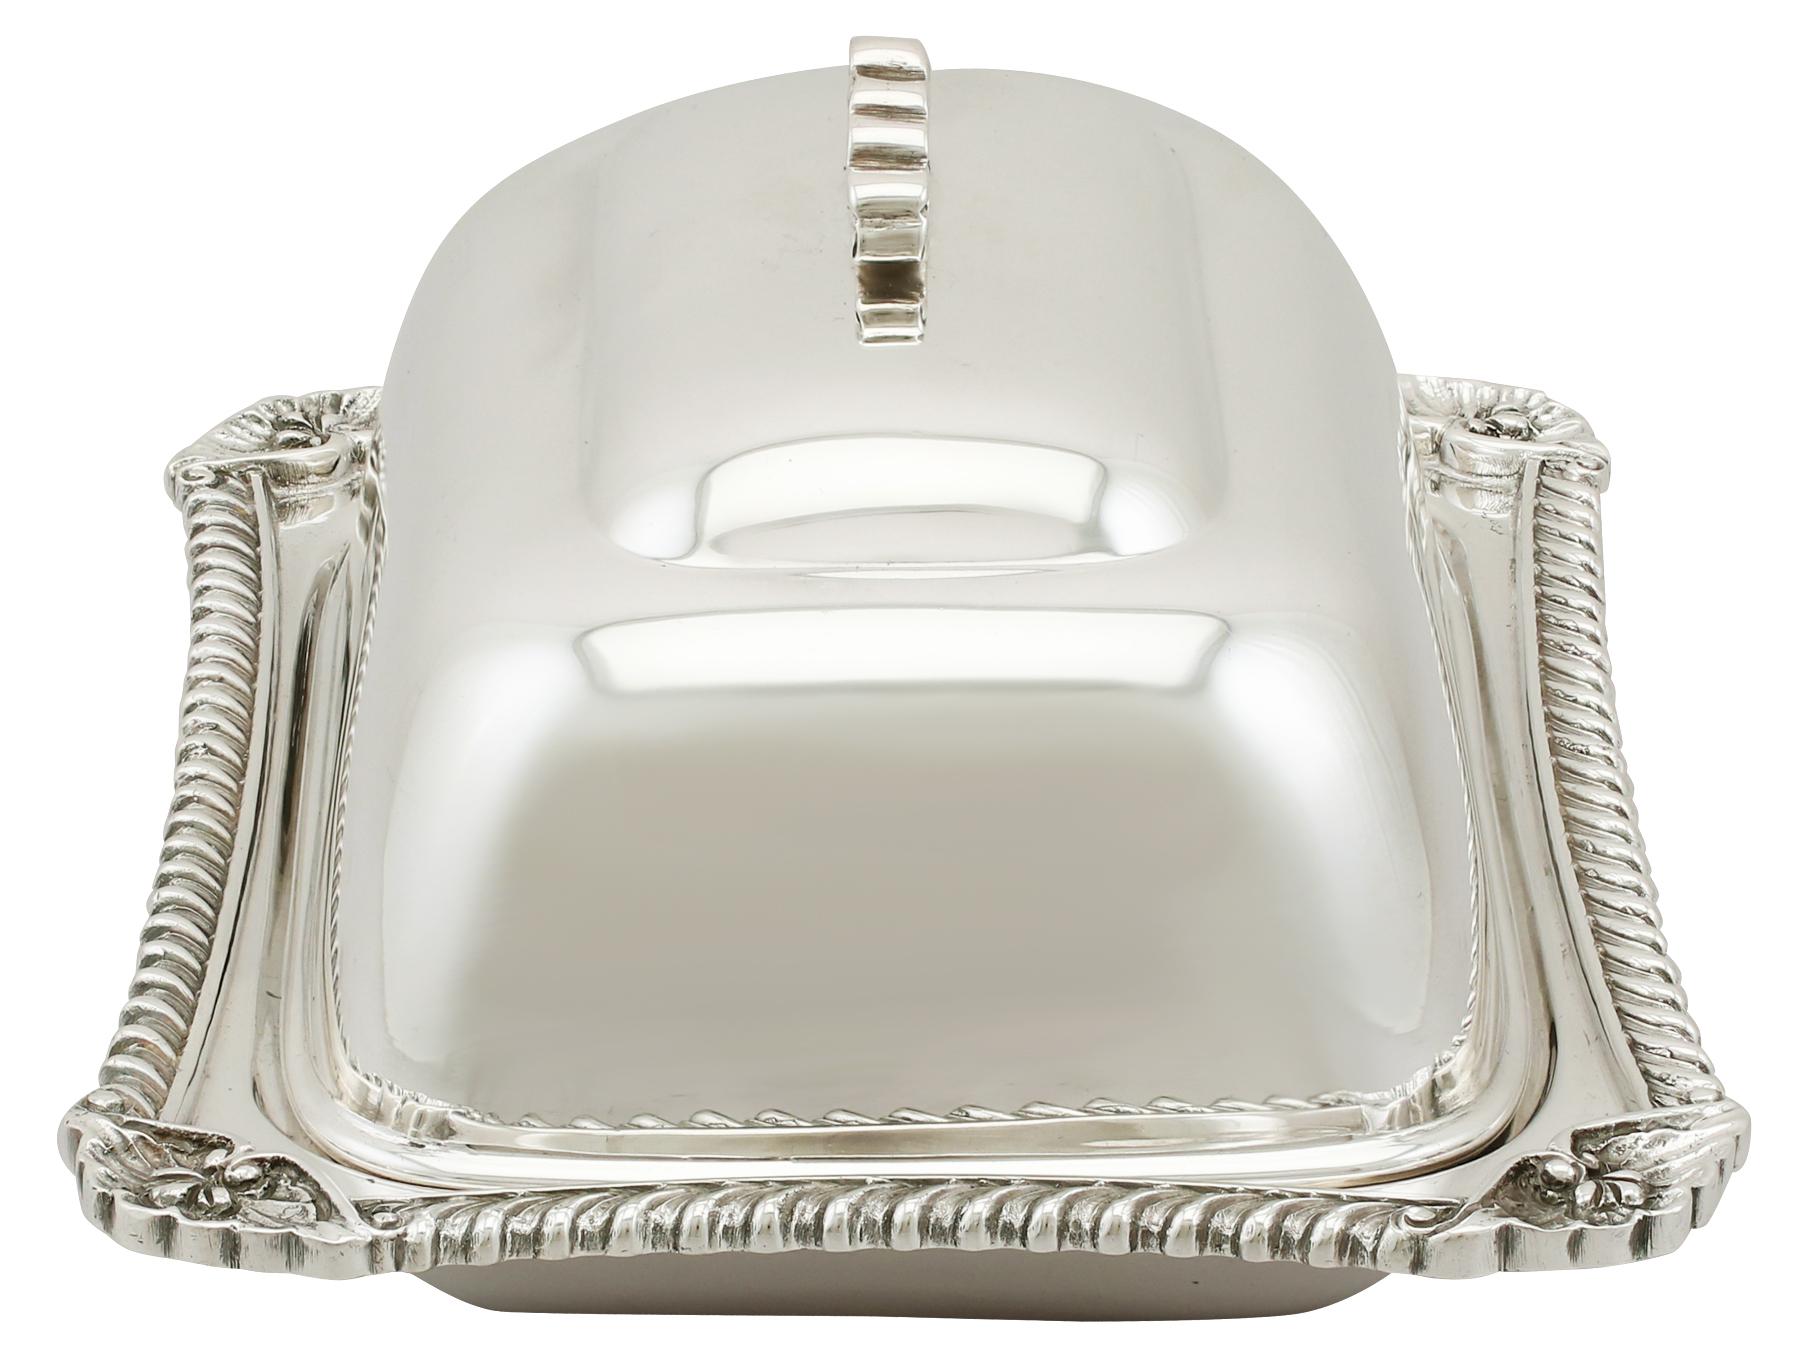 An exceptional, fine and impressive vintage Elizabeth II English sterling silver butter dish and cover.

This exceptional vintage Elizabeth II sterling silver butter dish has a rectangular rounded form.

The surface of this sterling silver dish